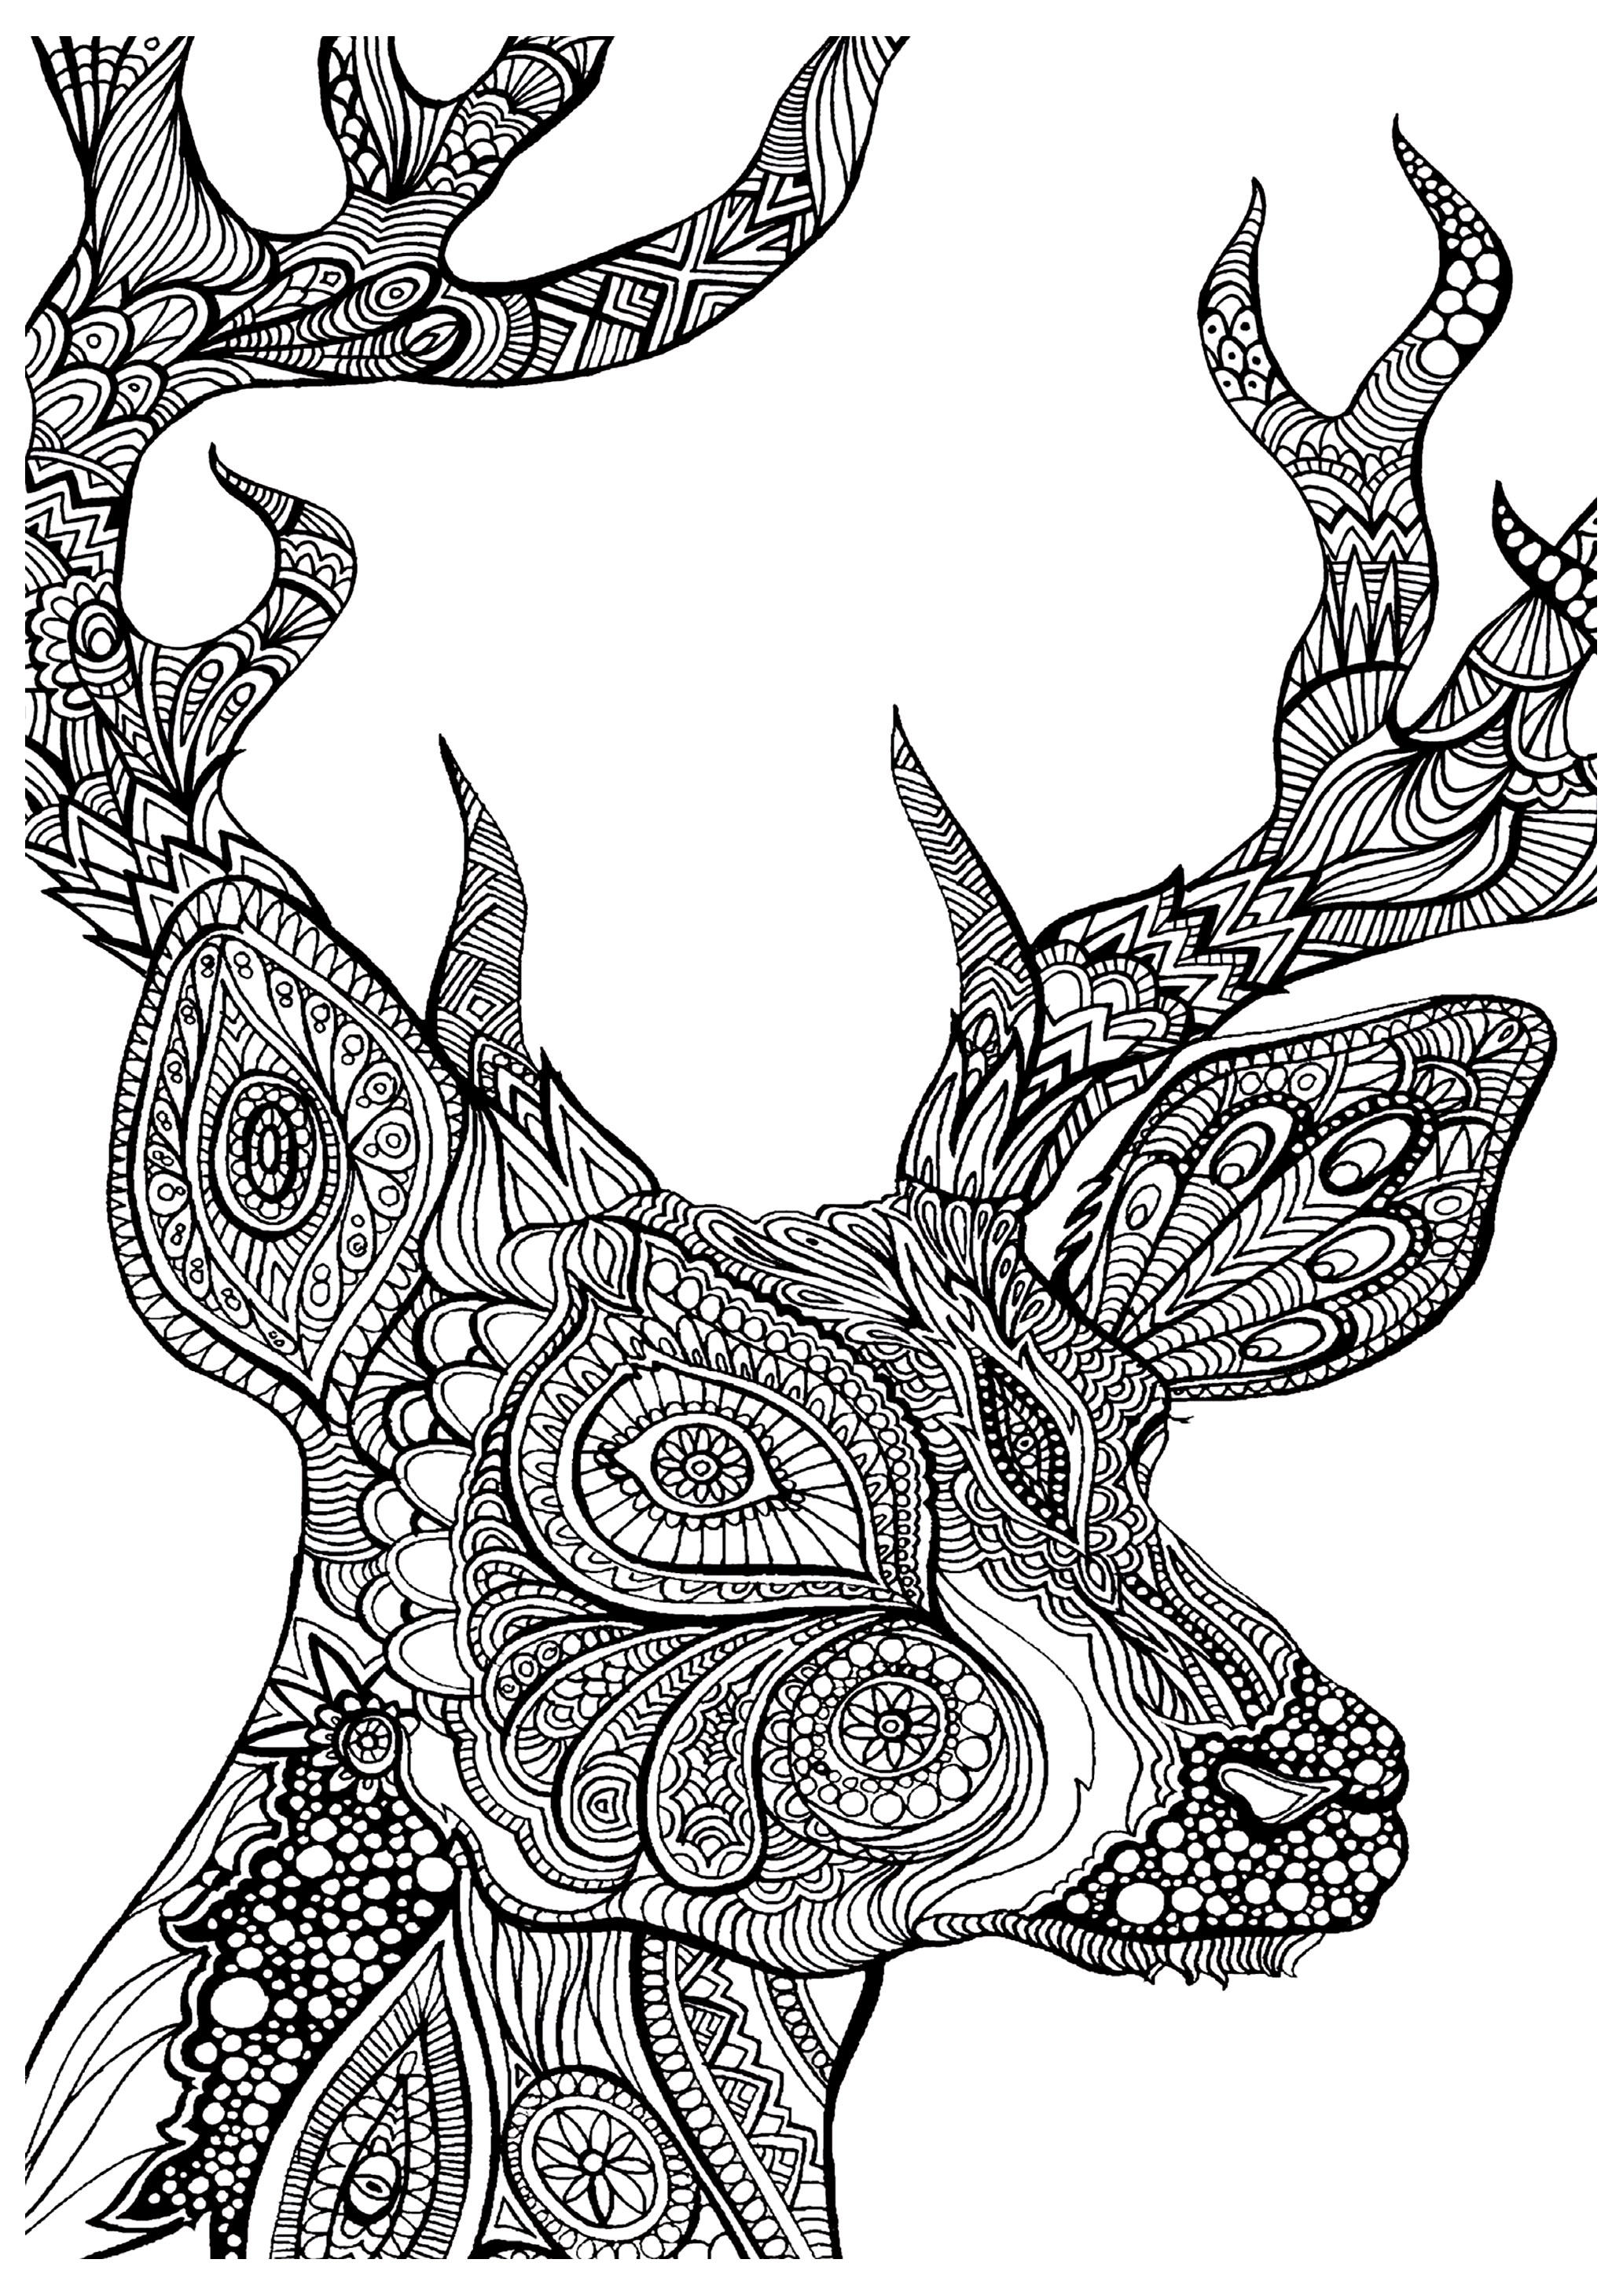 free adult coloring pages